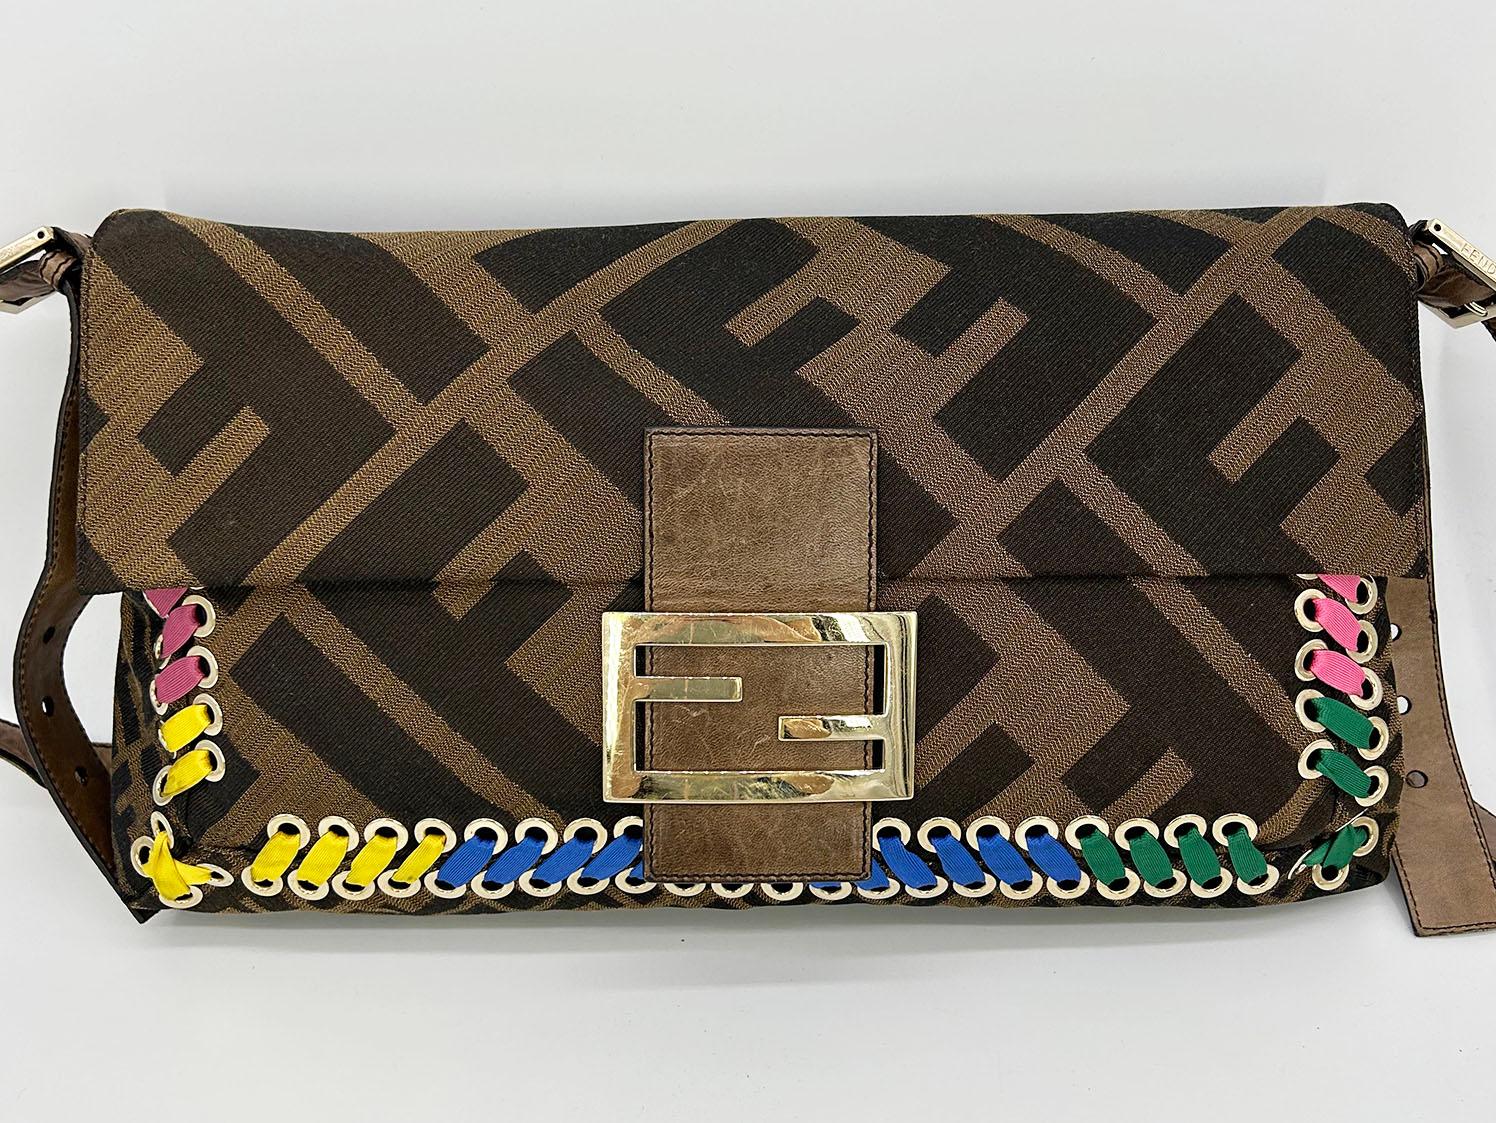 Fendi Zucca Canvas Rainbow Whipstitch XL Baguette In Good Condition For Sale In Philadelphia, PA